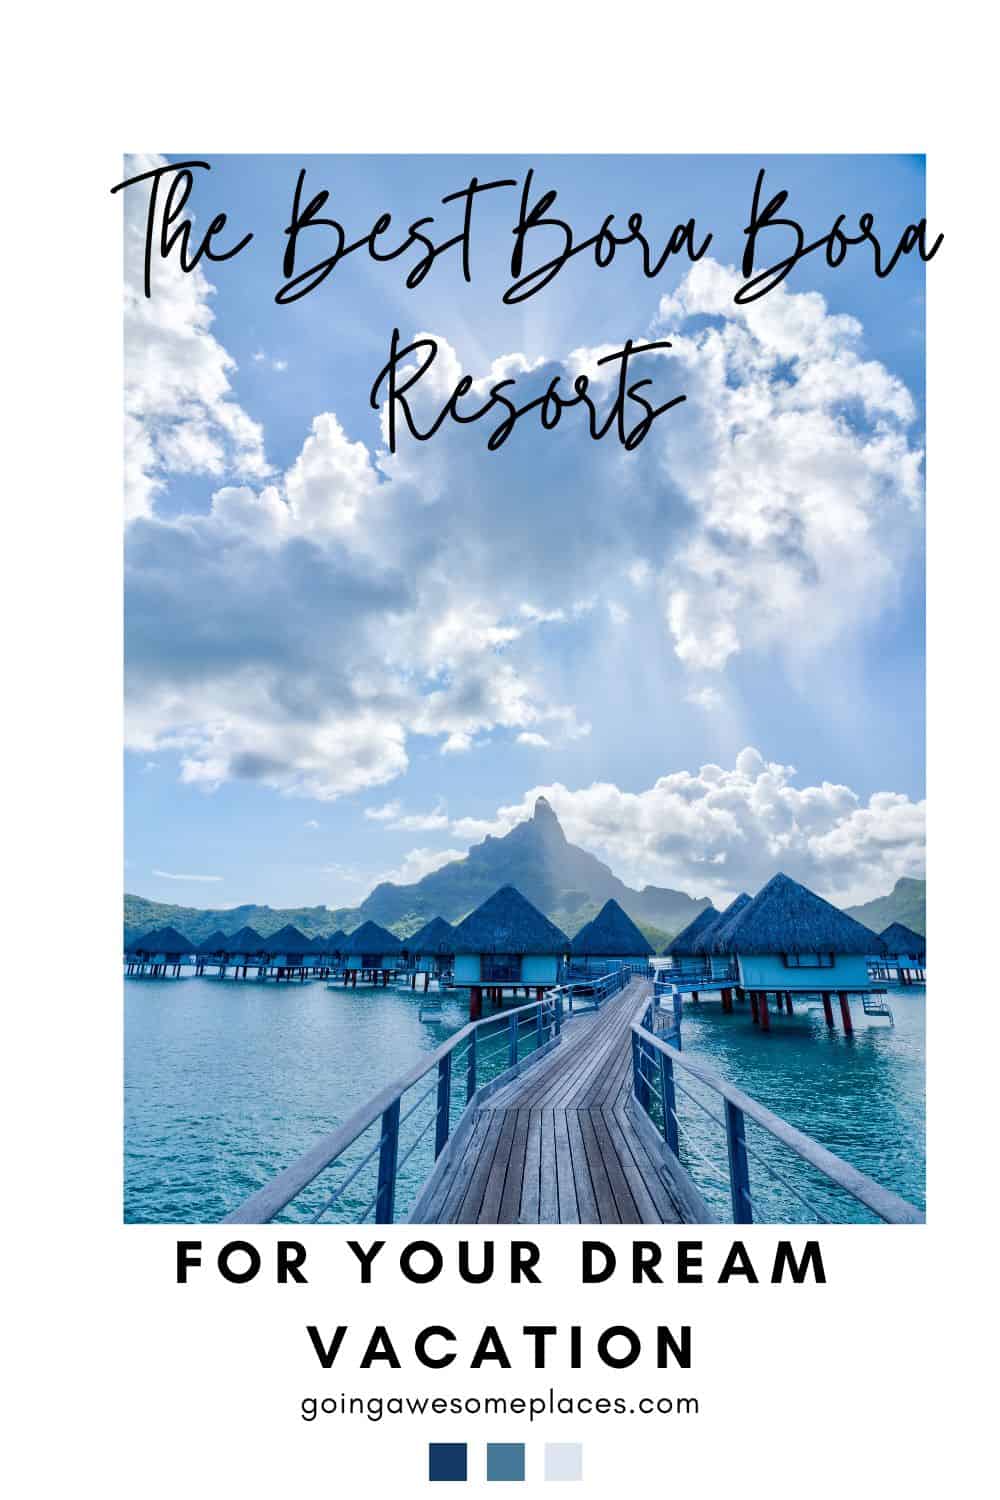 The Best Bora Bora Resort For Your Dream Vacation